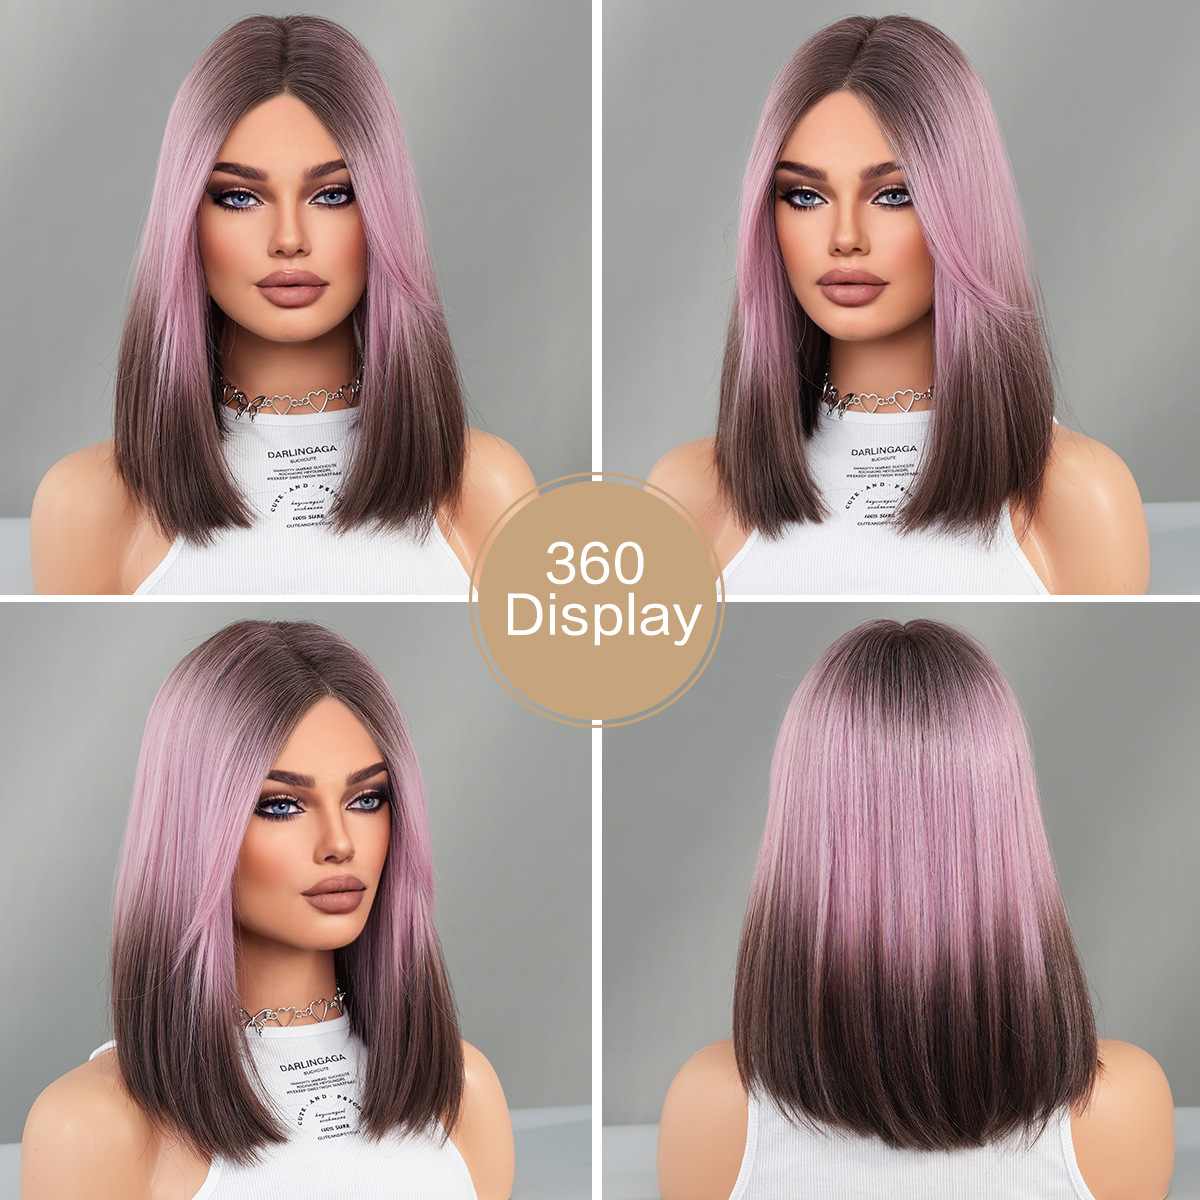 Stylish synthetic wig with small T lace, featuring pink gradient brown short straight hair parted in the middle